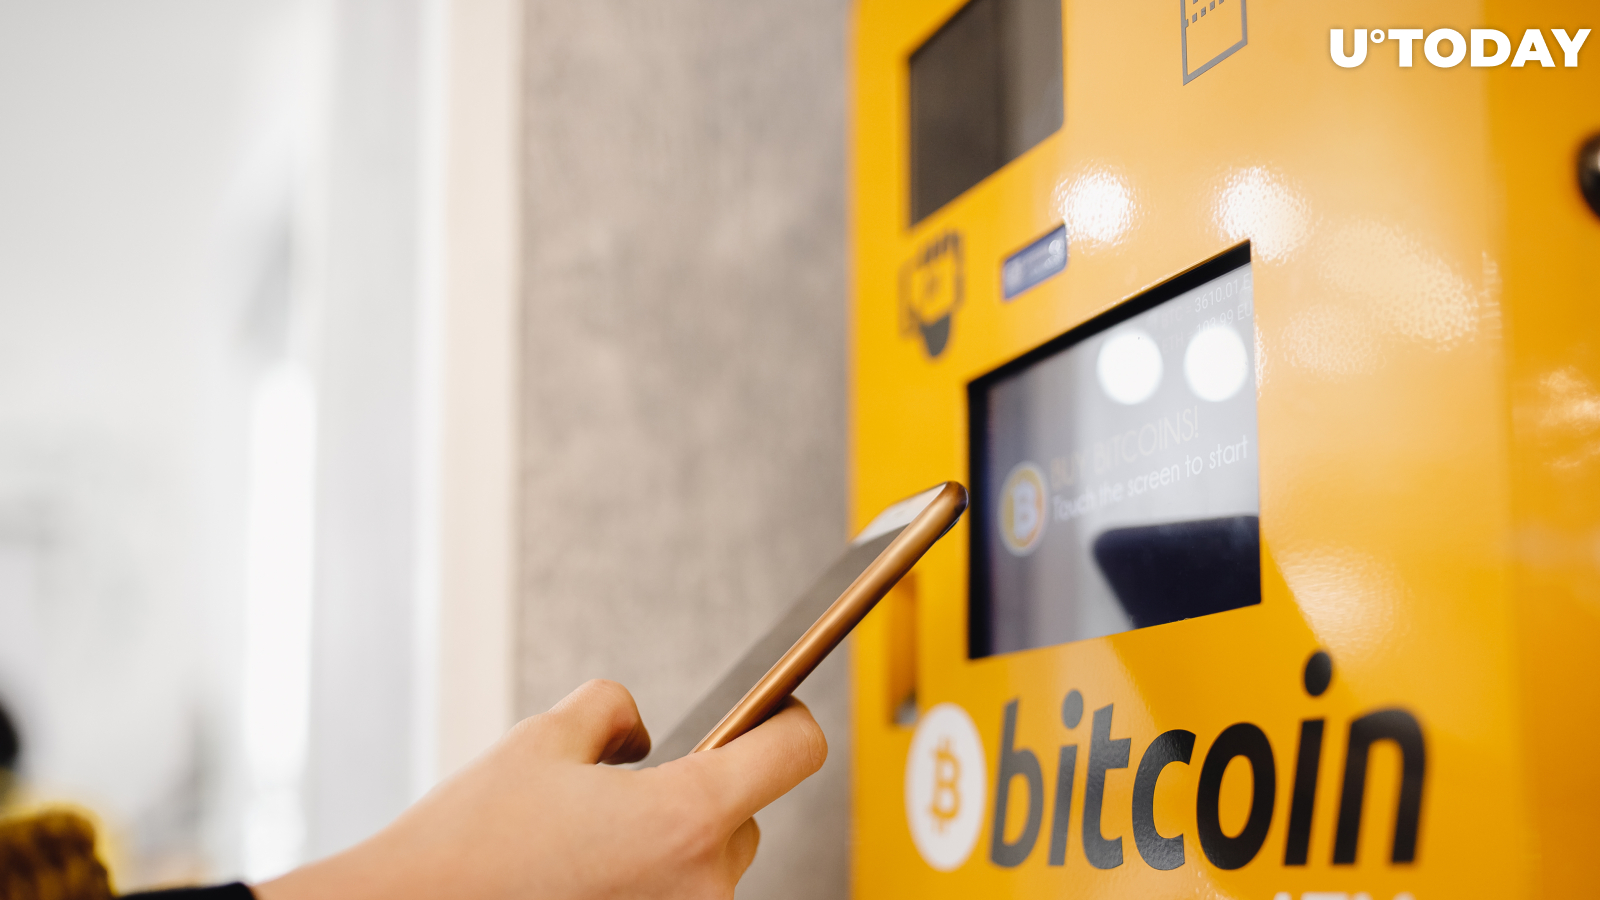 <span>Bitcoin ATM Installed in Mexican Senate Building </span>
